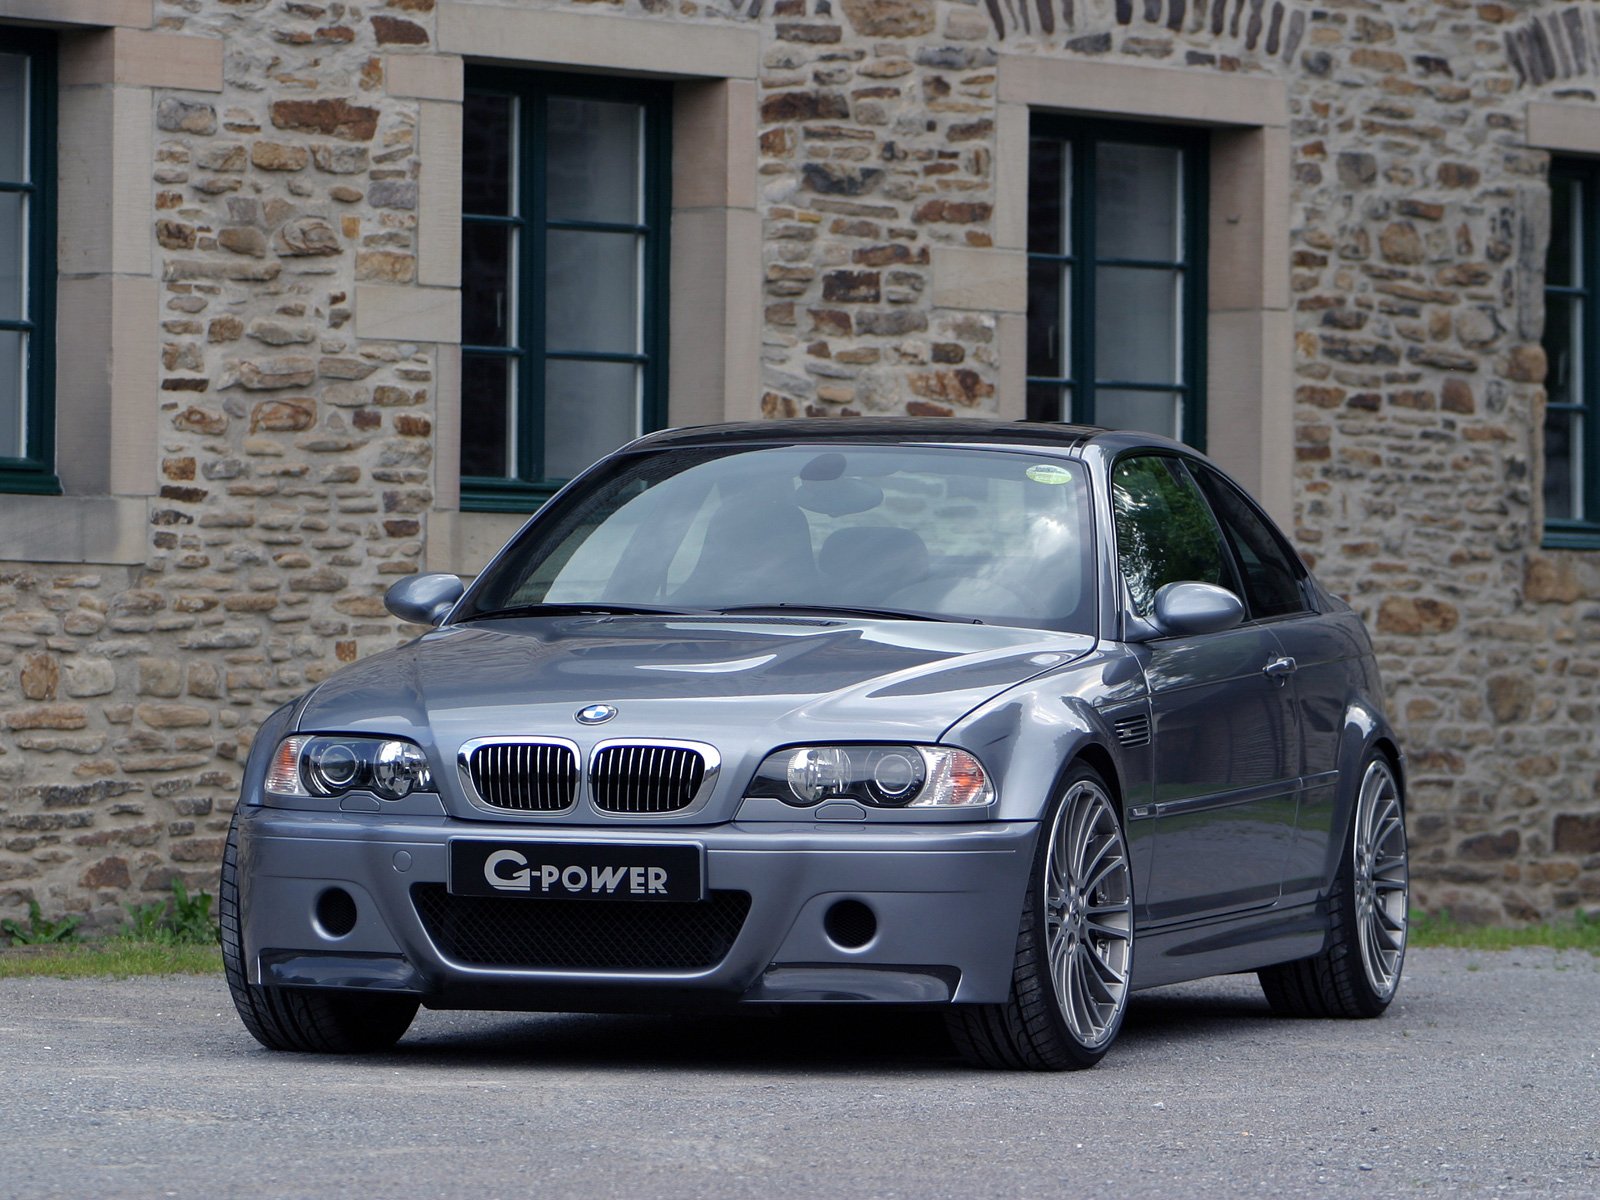 g power, Bmw m3, Coupe, Cls,  e46 , Cars, Modified, 2012 Wallpaper